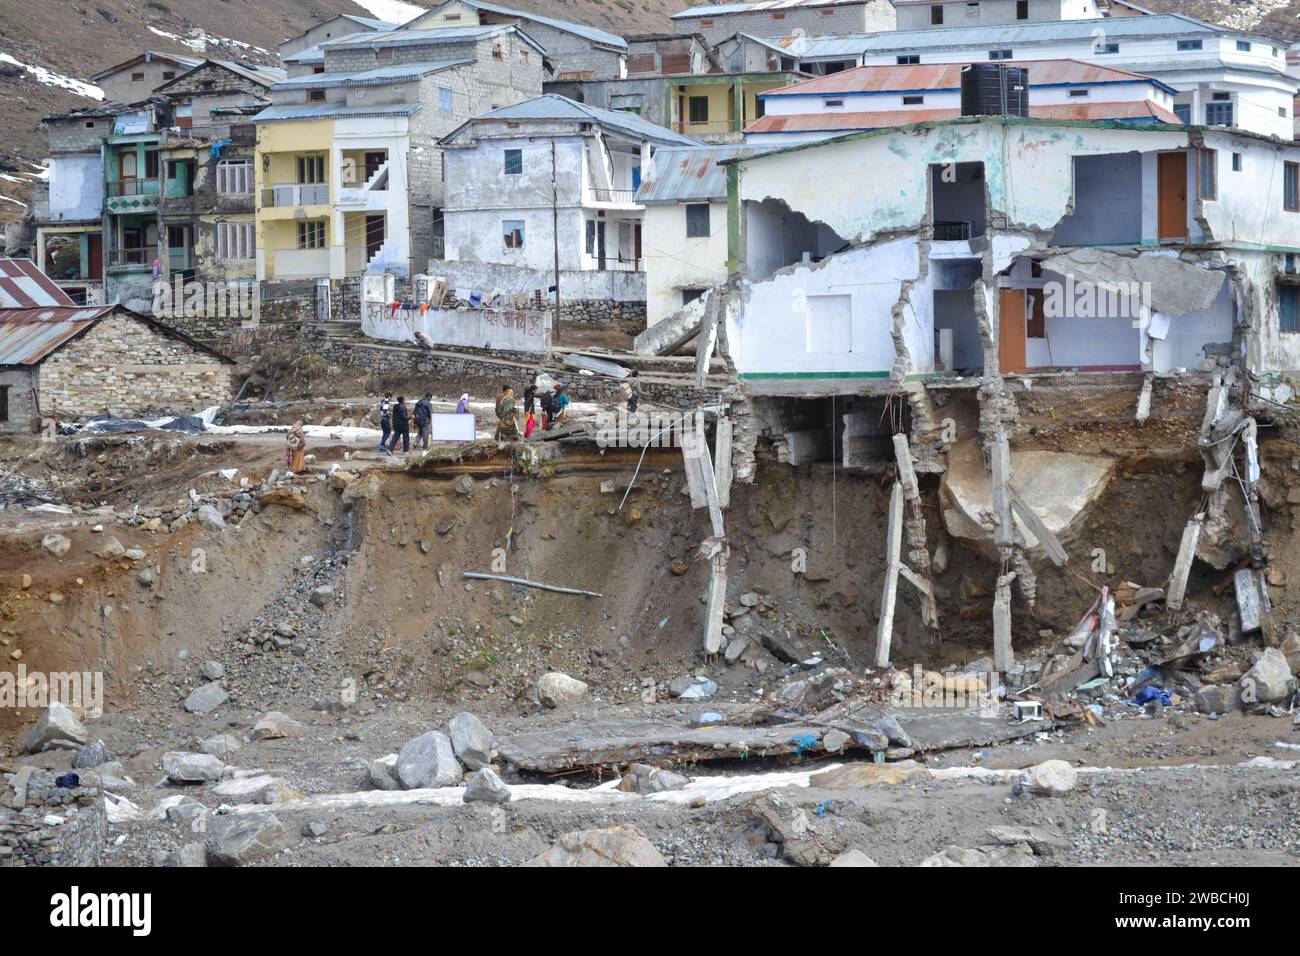 Damaged buildings due to Kedarnath disaster in June 2013. In 2013, a multi-day cloudburst centered on the North Indian state of Uttarakhand caused cou Stock Photo